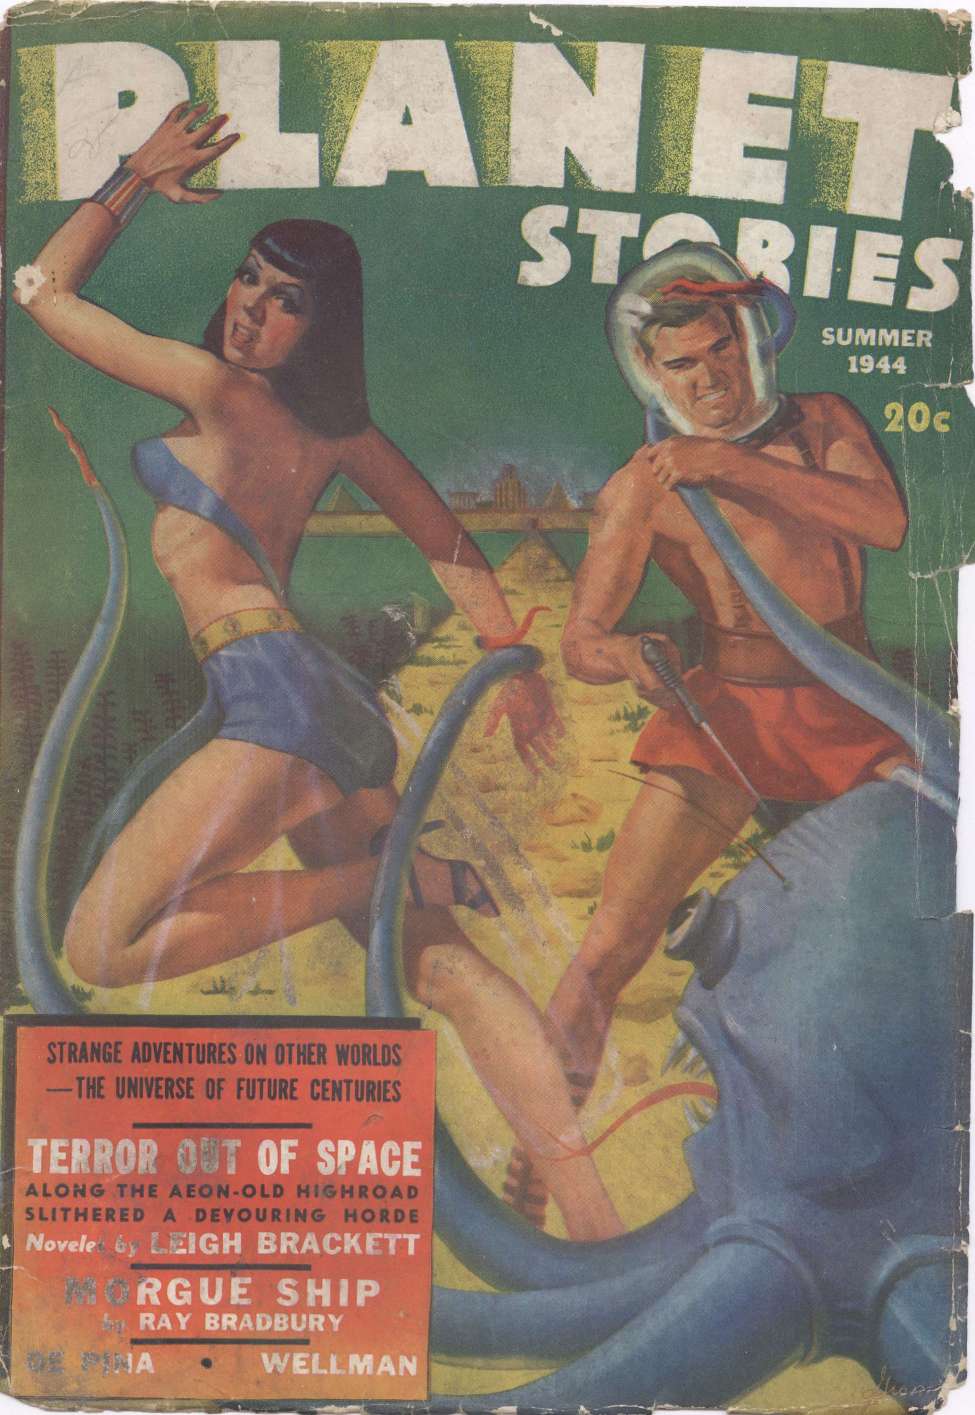 Book Cover For Planet Stories v2 7 - Terror Out of Space - Leigh Brackett